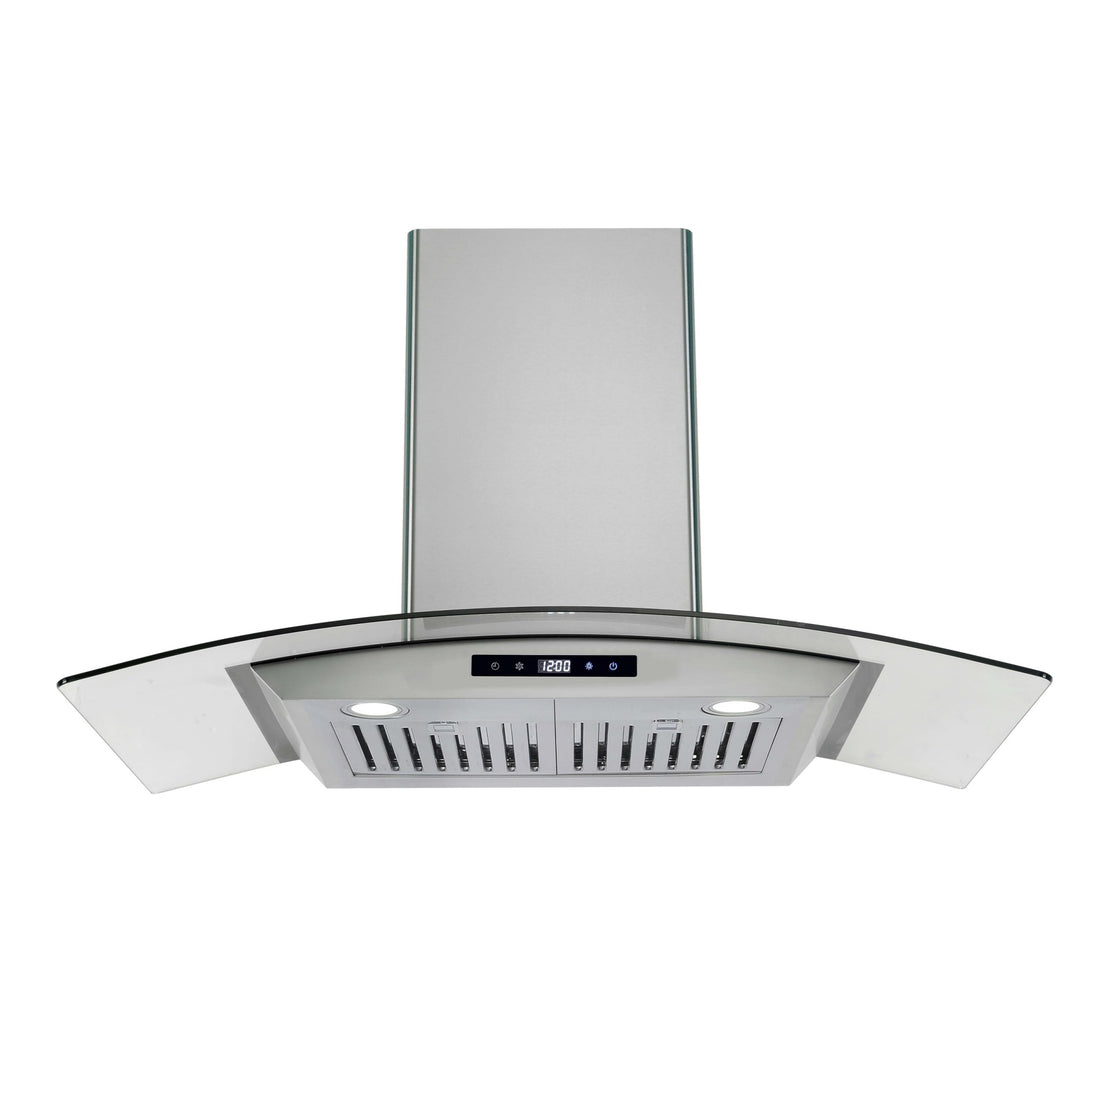 Range Hood 30 Inch, Ducted/Ductless Range Hood Stainless Steel Wall Mount Kitchen Vent Hood, 400CFM, Tempered Glass, 3-Speed Touch Control LED Light